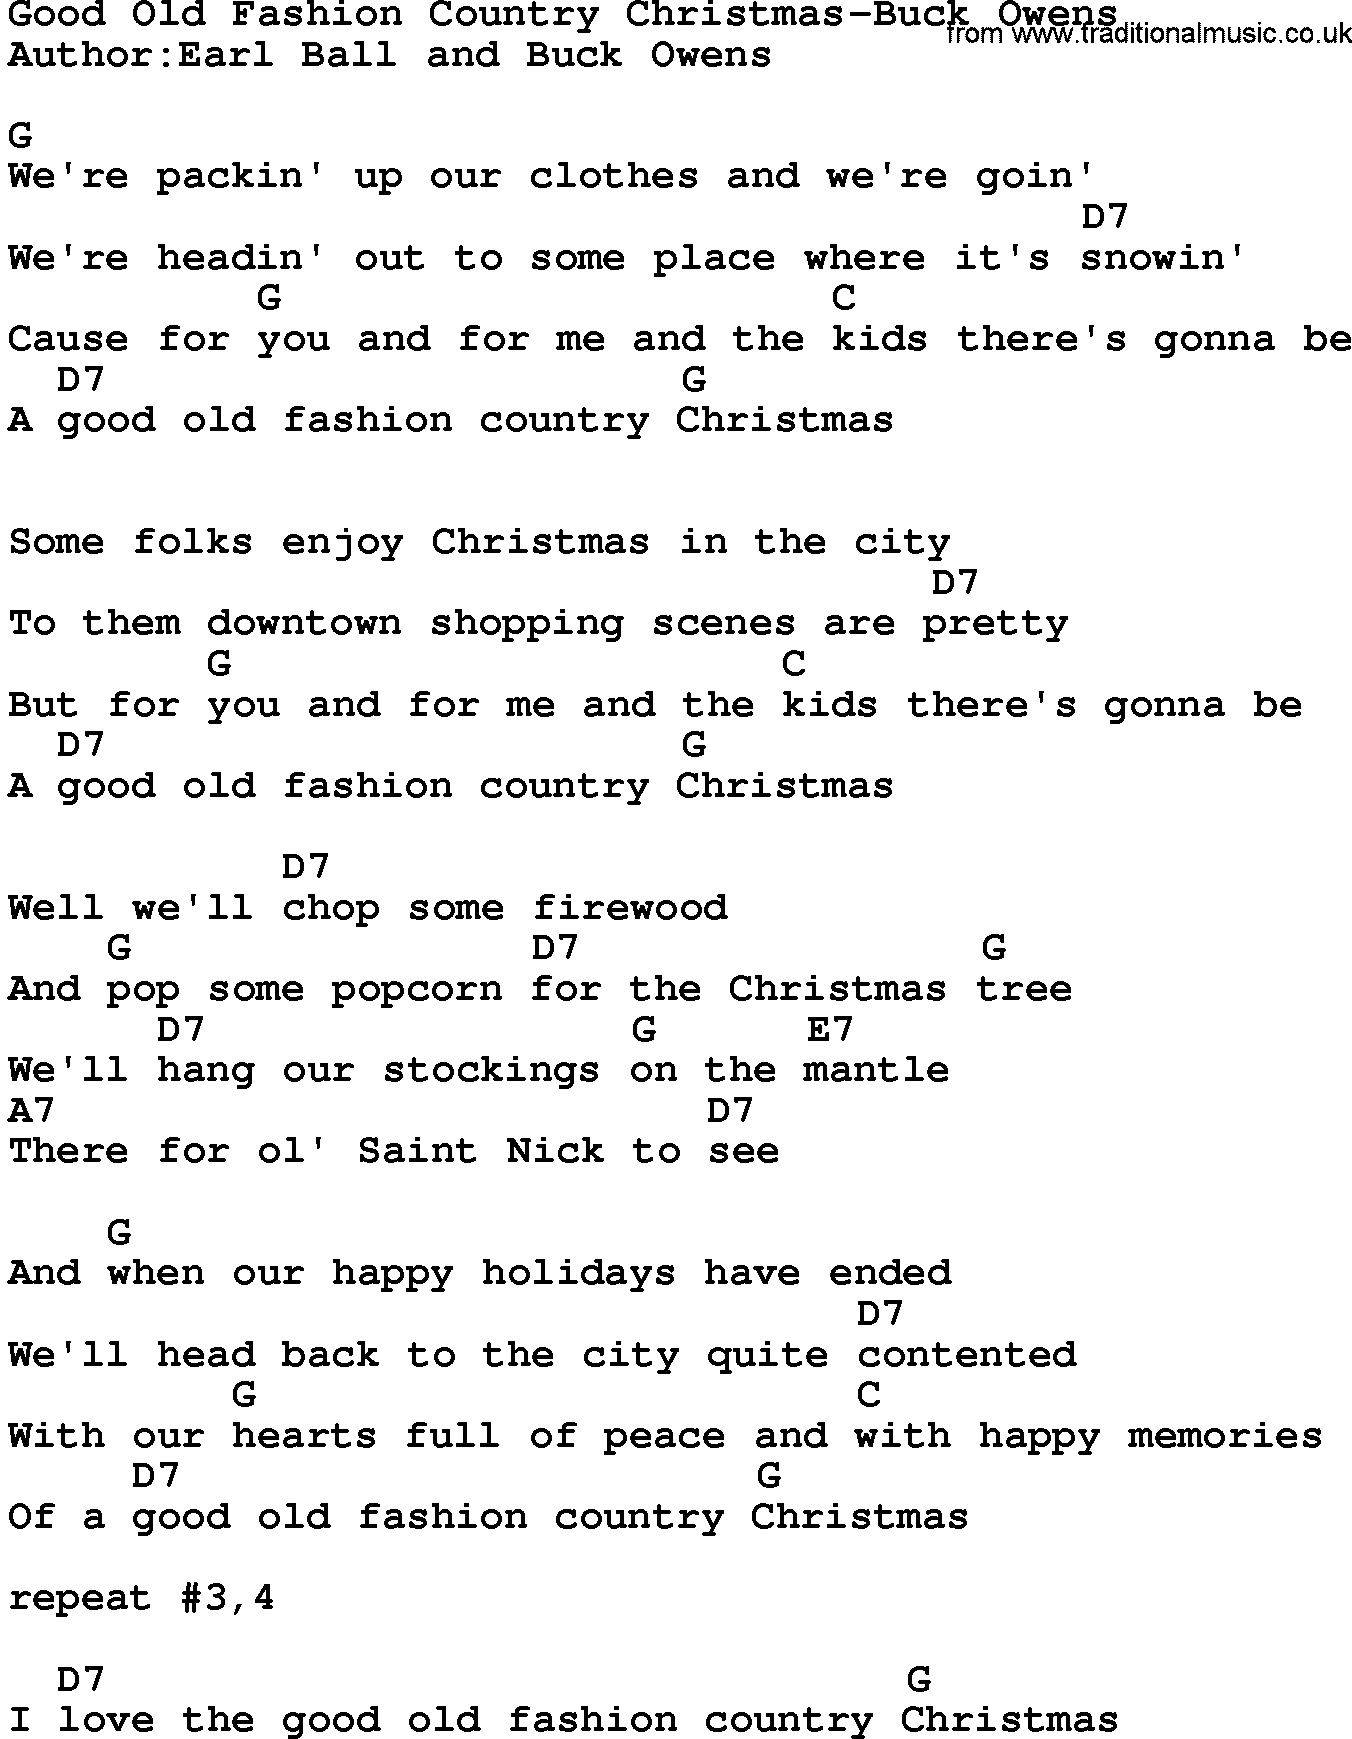 Country music song: Good Old Fashion Country Christmas-Buck Owens lyrics and chords